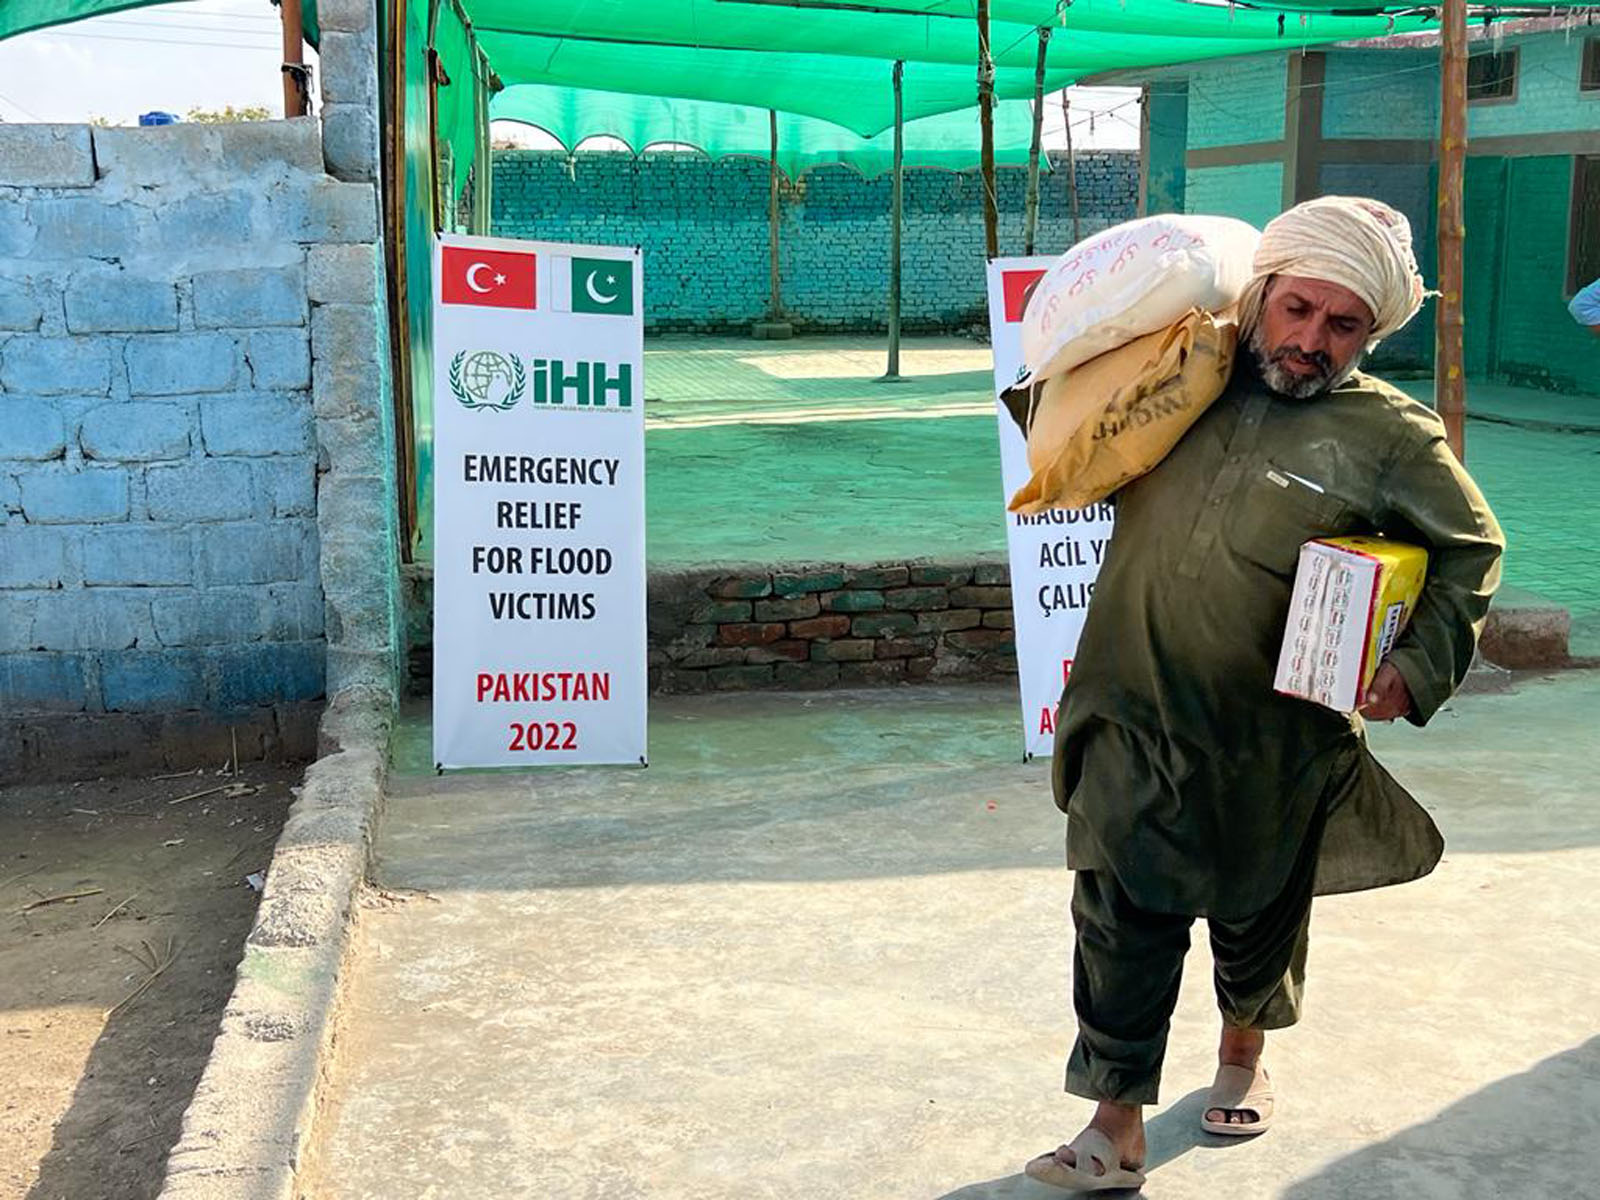 IHH Takes Action for Pakistan